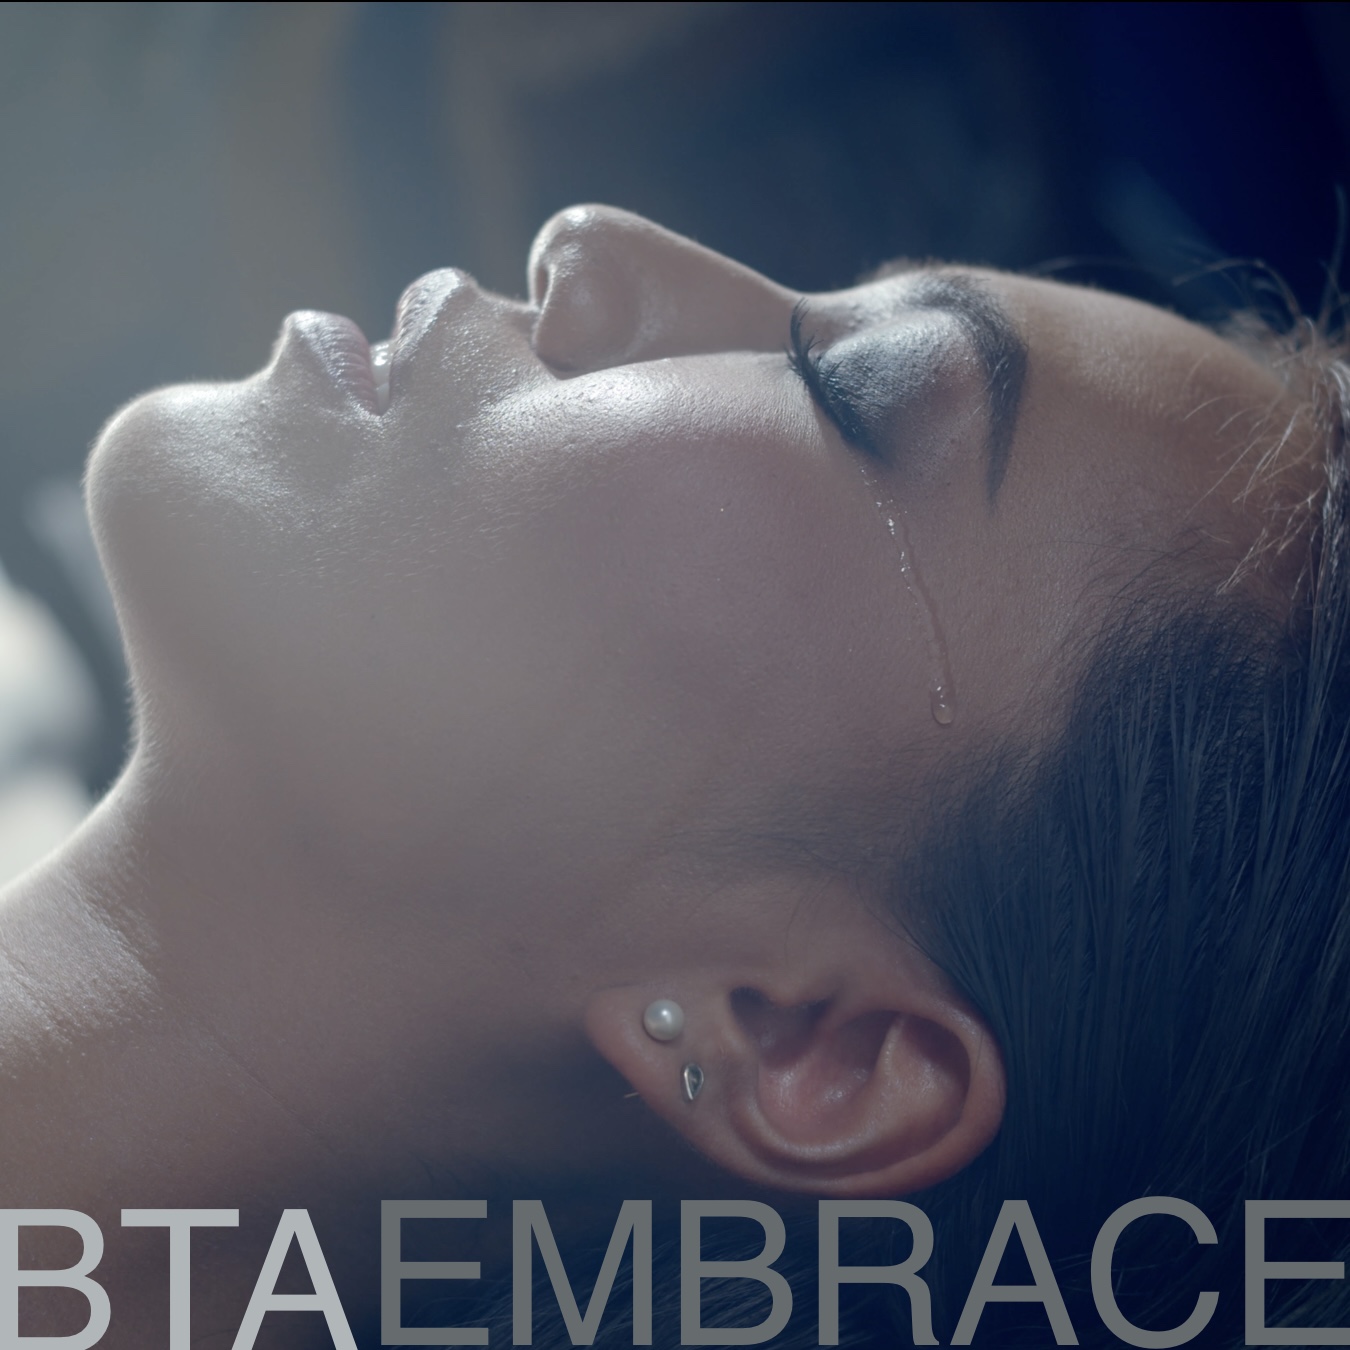 ‘Embrace’ is an uplifting single with cinematic instrumentation from Bangkok-based artist BTA.